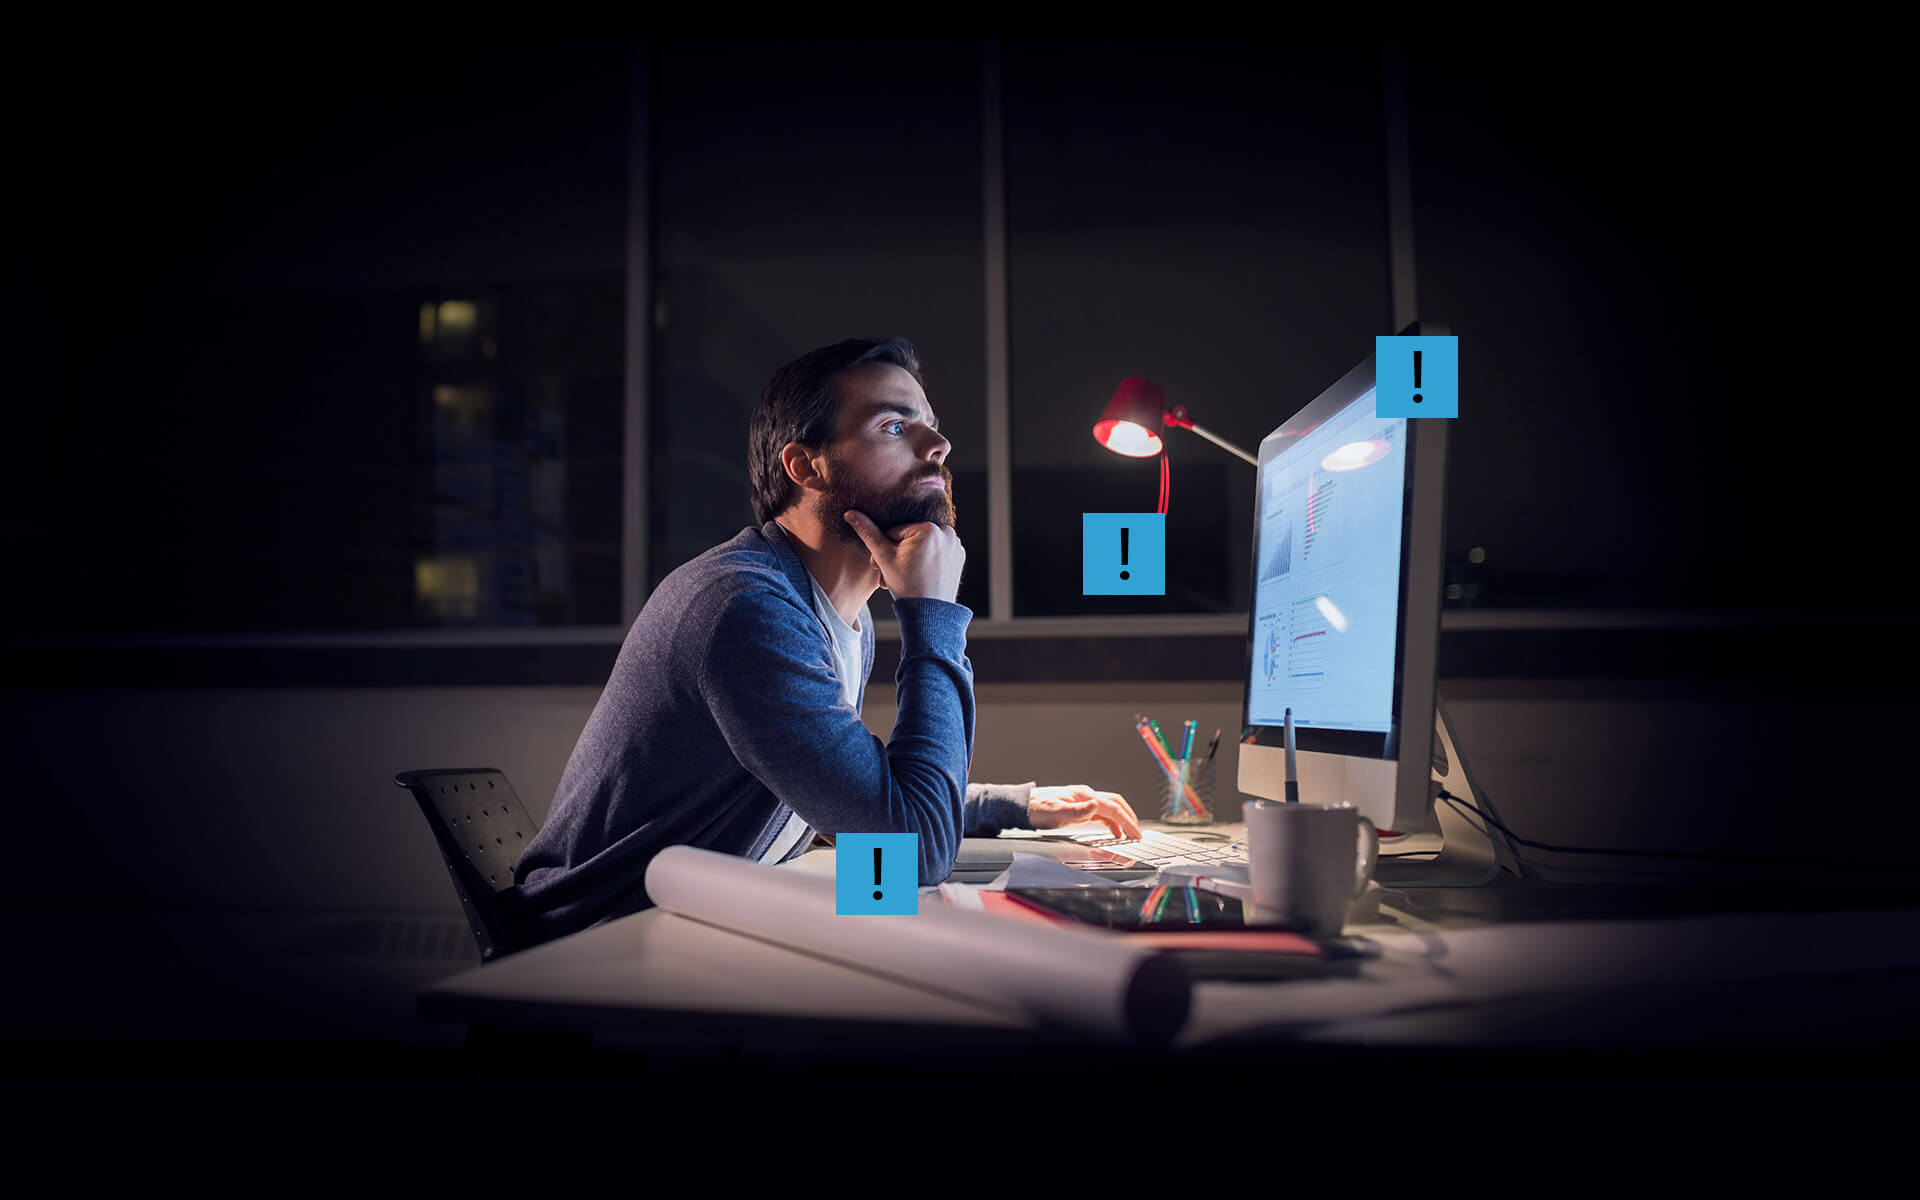 A man in front of his imac working at his desk at night